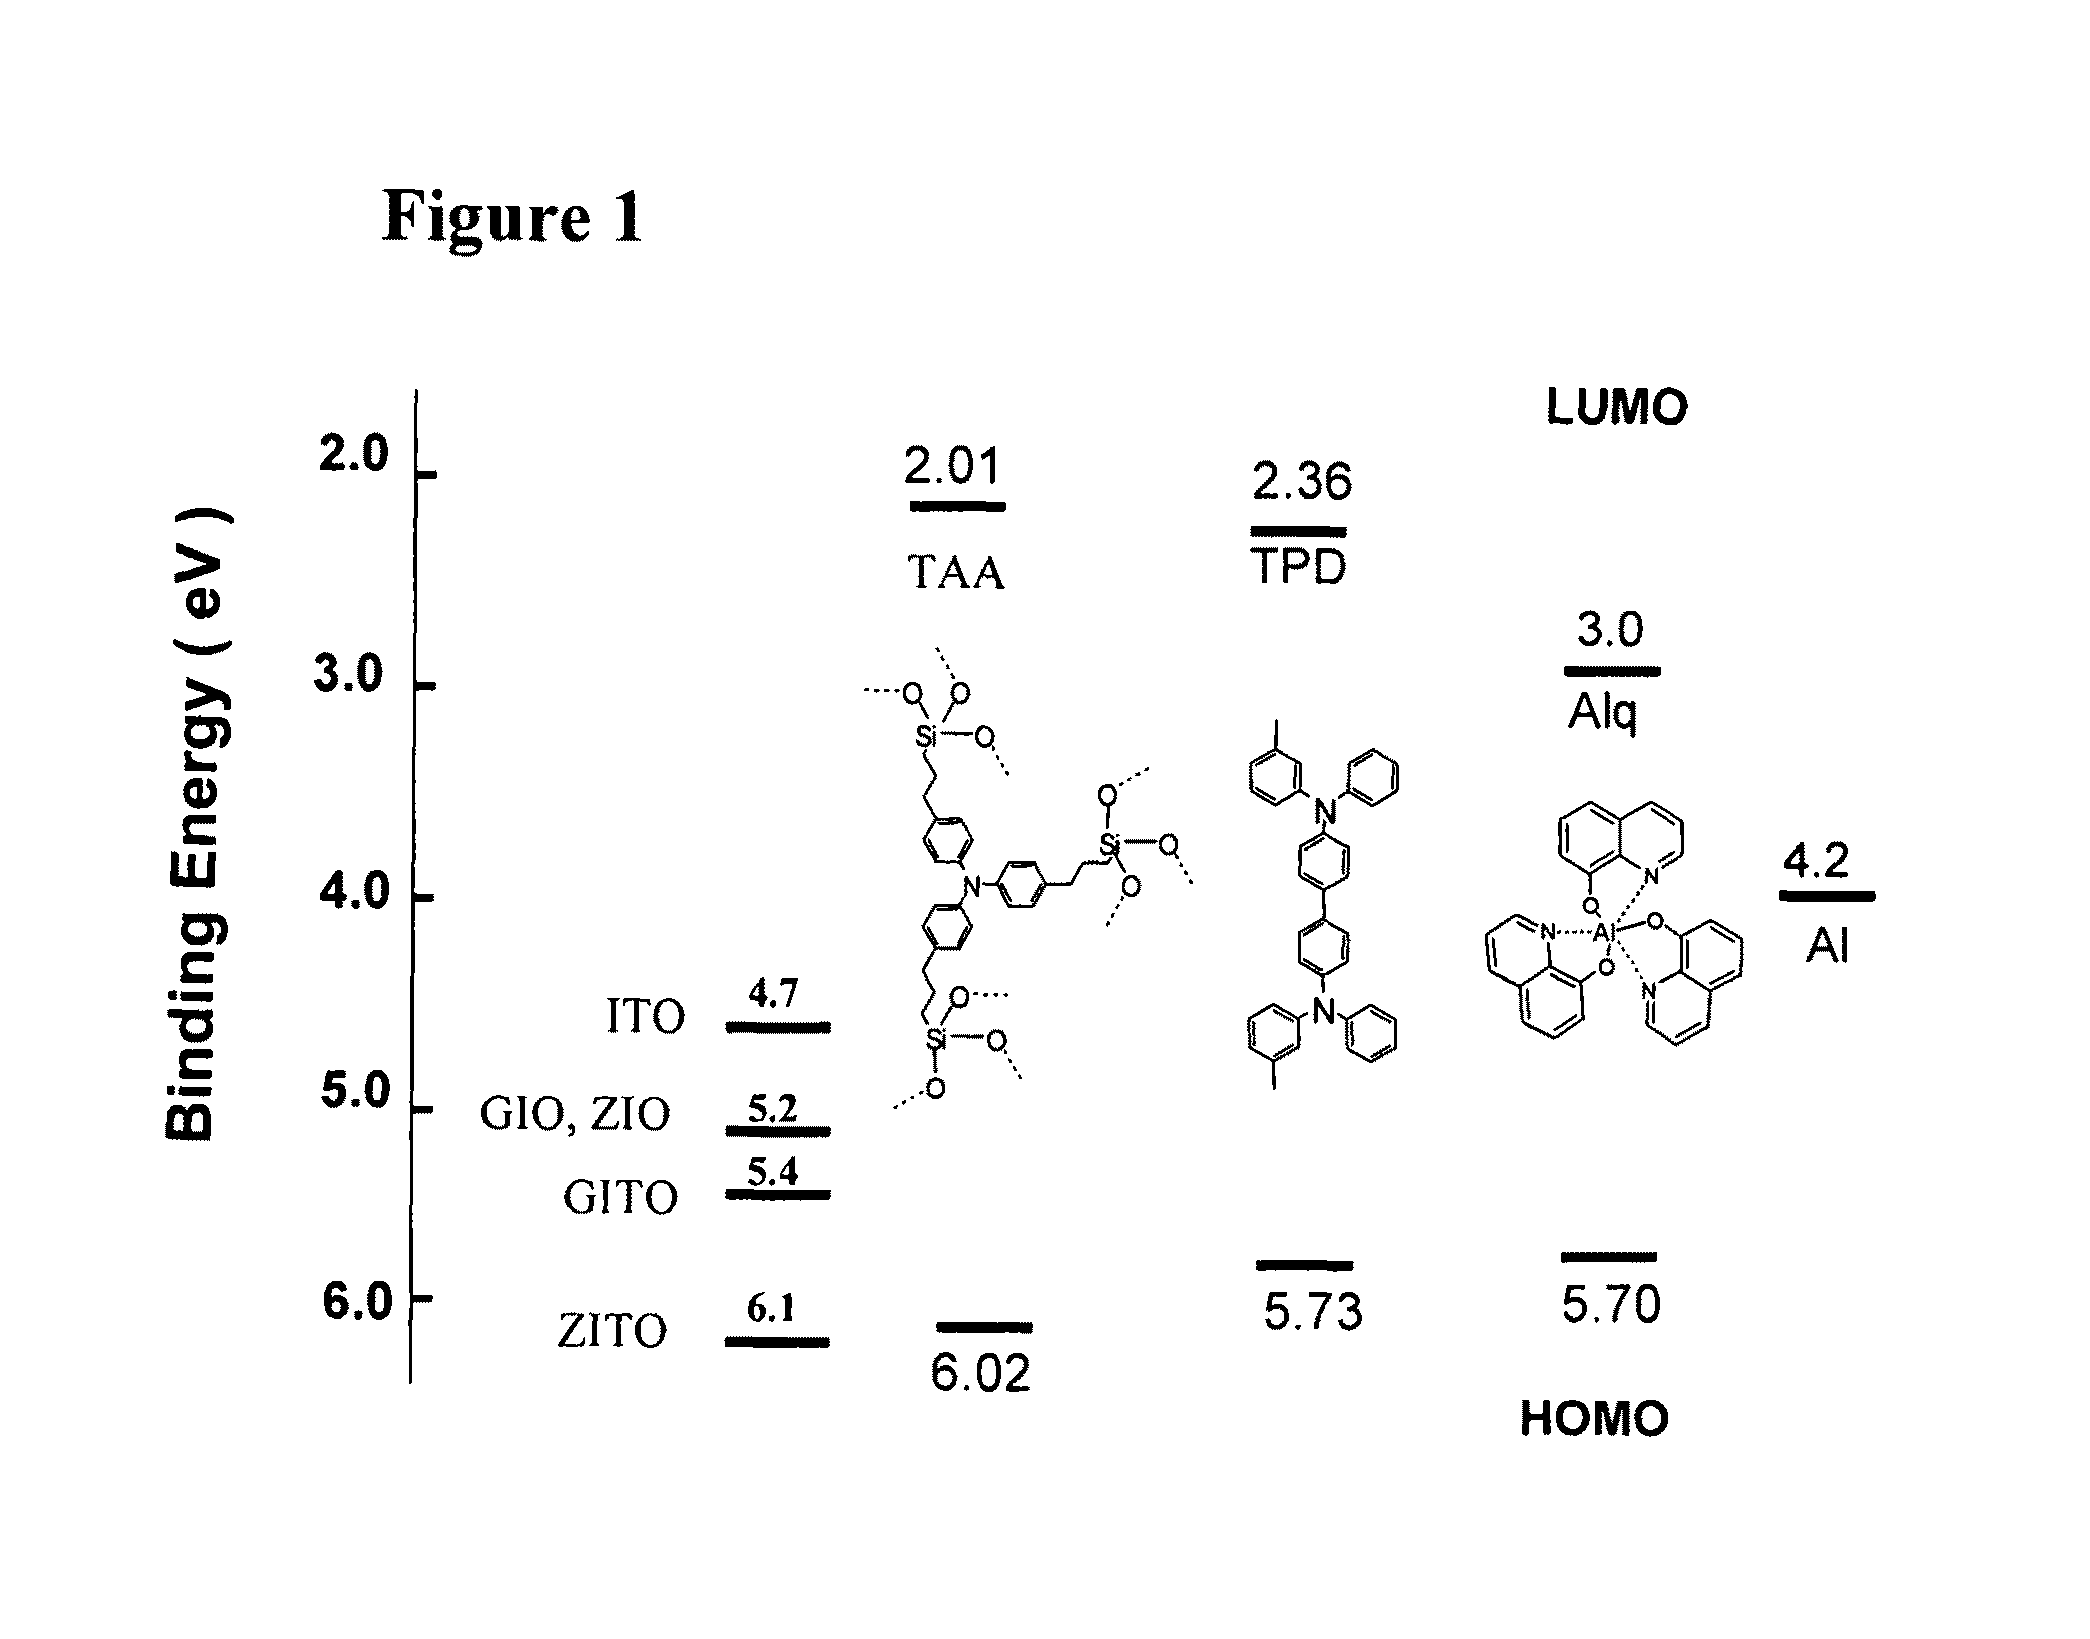 Transparent conducting oxide thin films and related devices